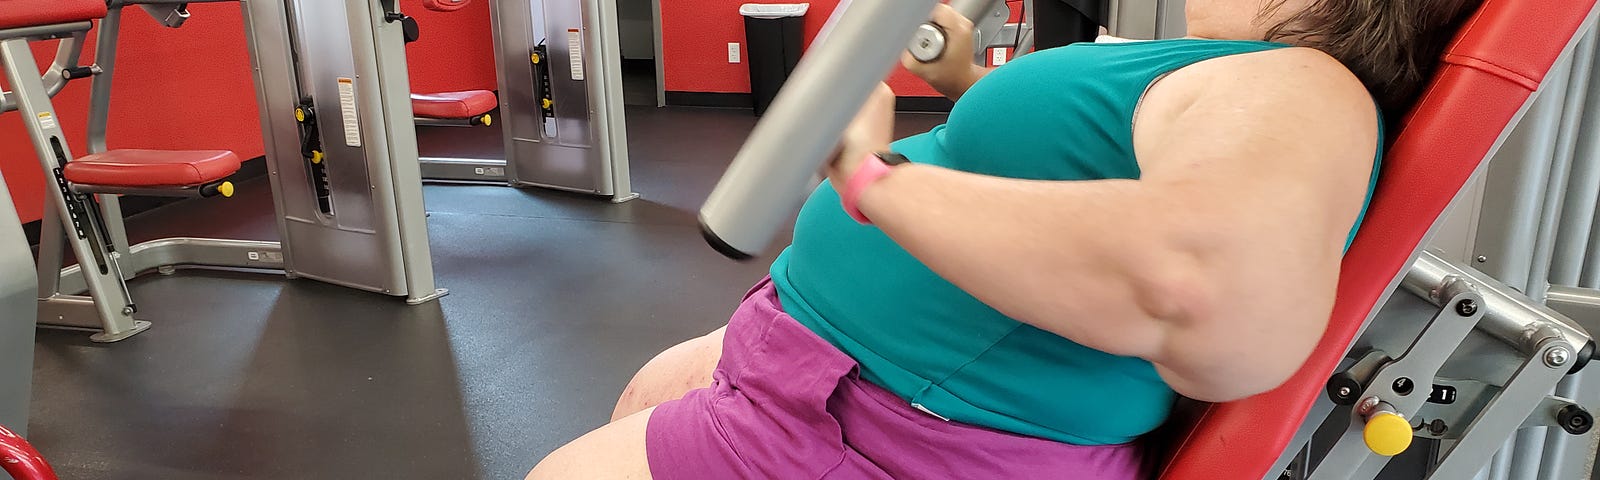 Middle aged fat woman in green tank top and purple shorts using a weight machine in a gym.